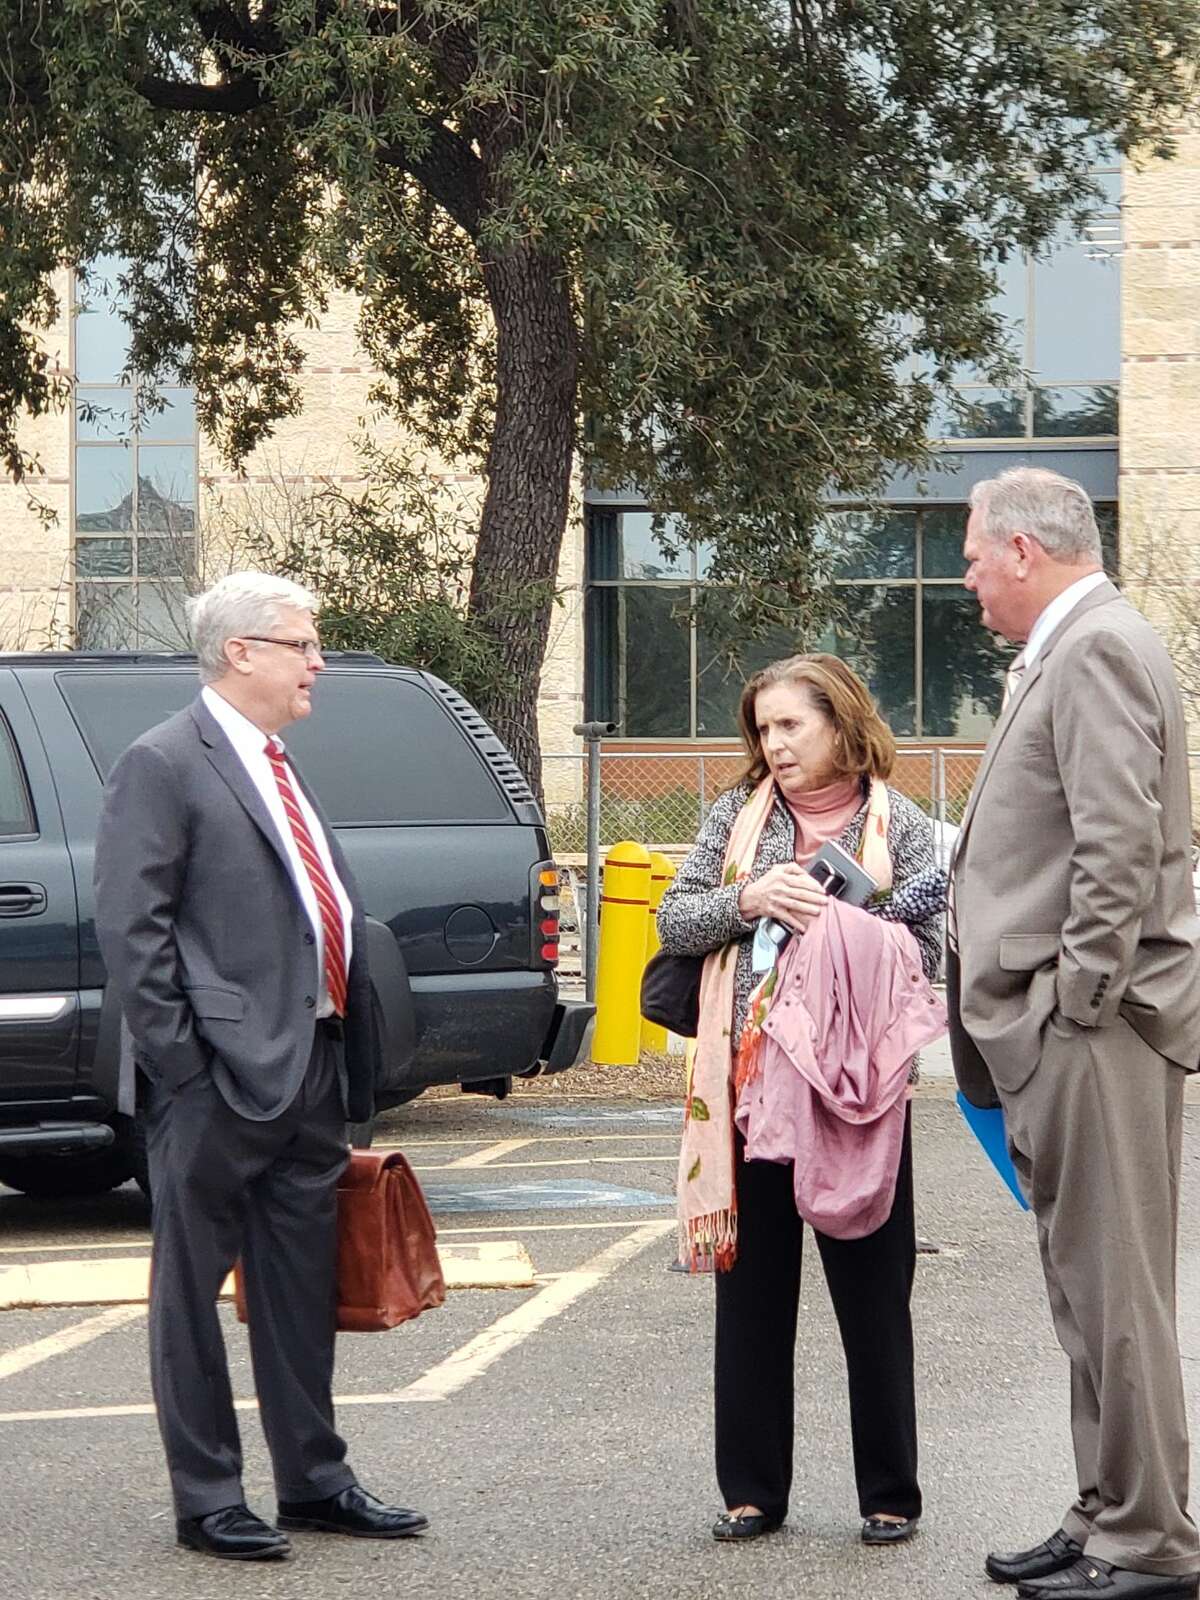 Former FedEx pilot Robert Steven Powell, far right, and his wife, Peggy, talk with Powell's lawyer, Michael Gross, near the federal courthouse in San Antonio after Powell was sentenced to 51 months in prison for tax evasion.